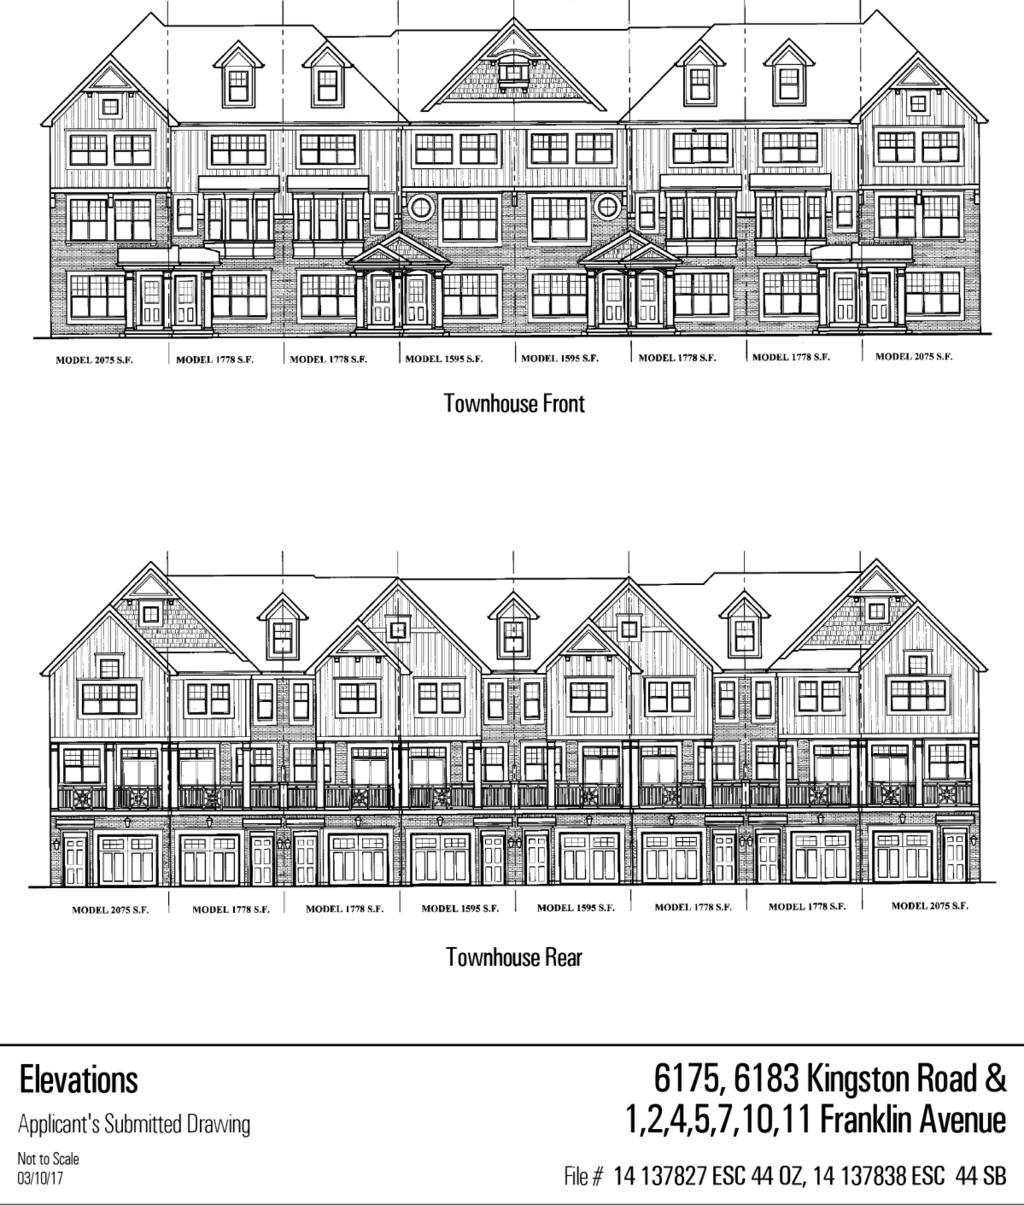 Attachment 3(a): Elevations